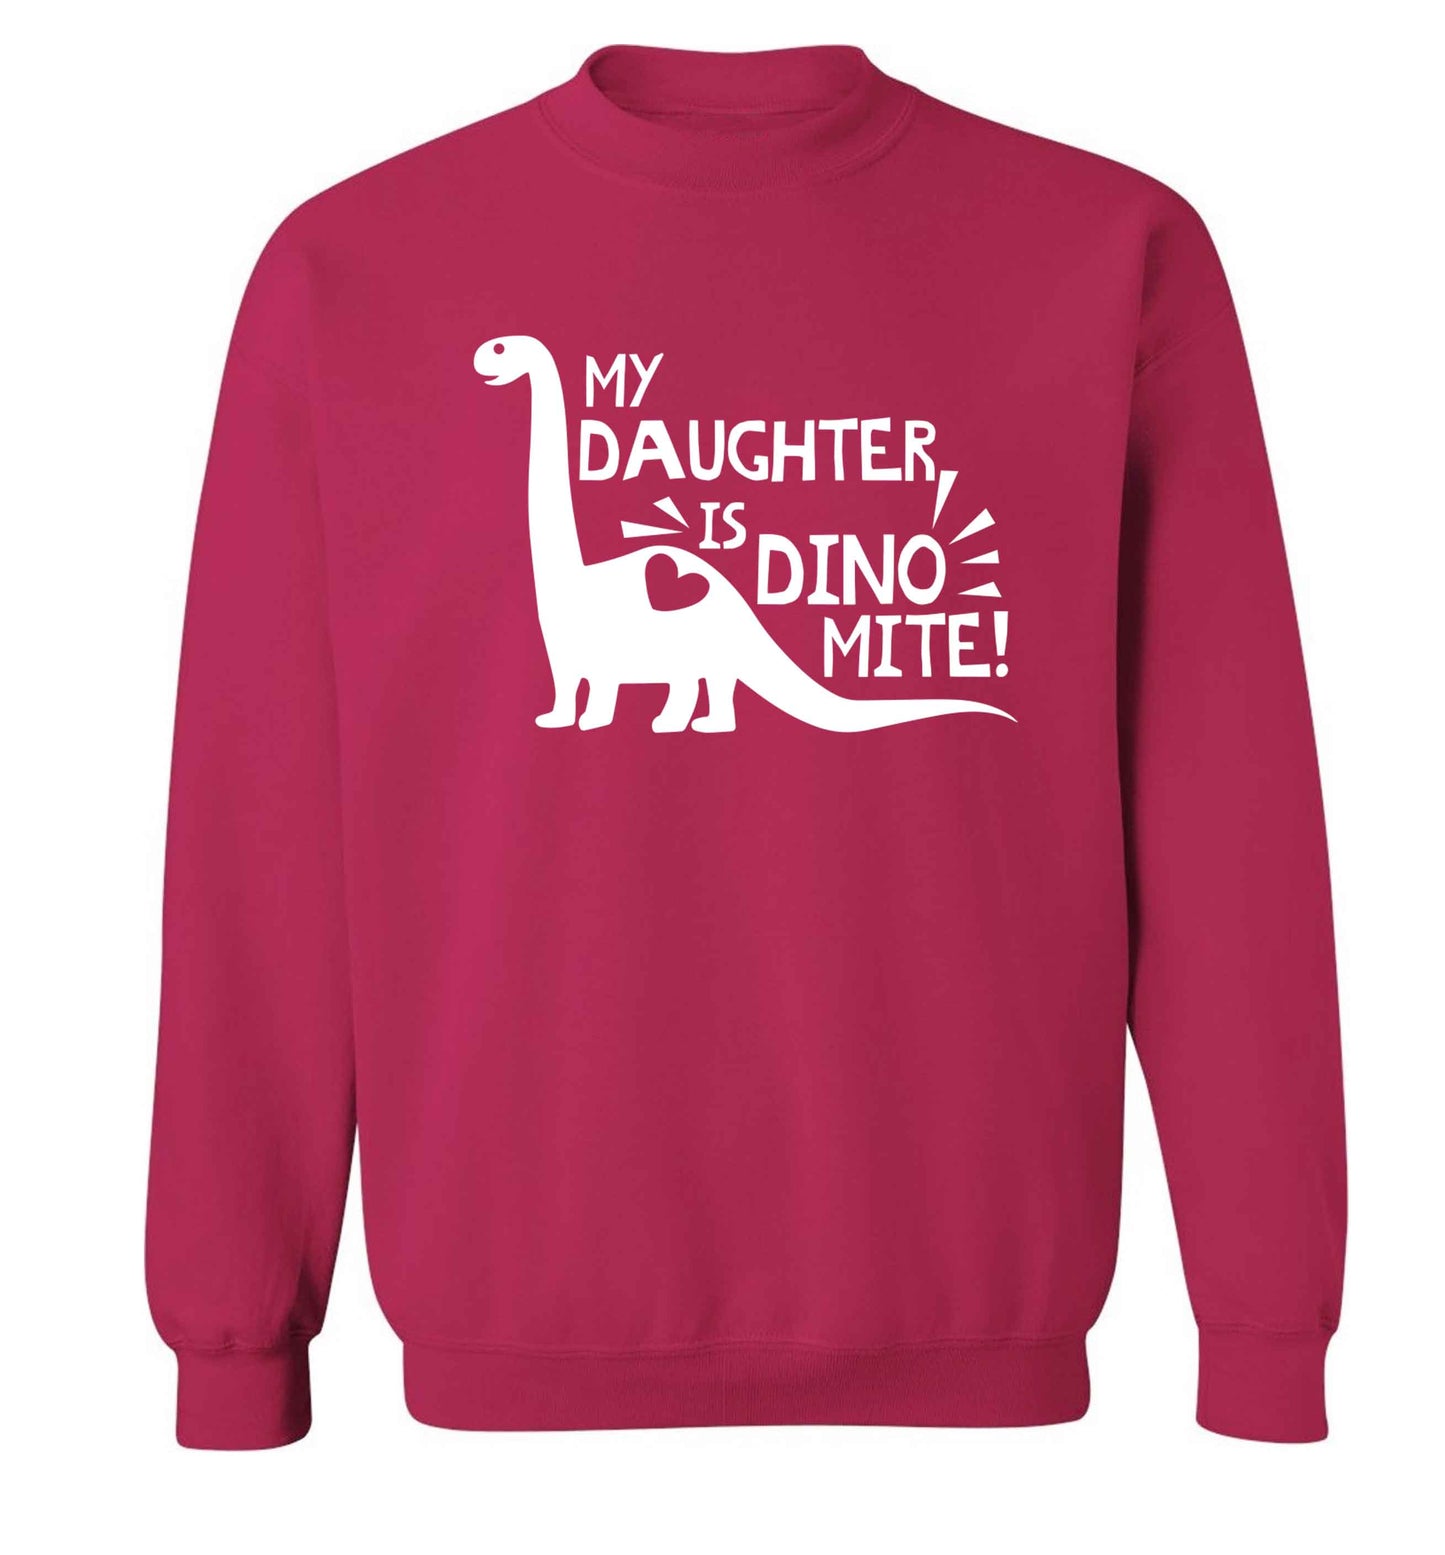 My daughter is dinomite! Adult's unisex pink Sweater 2XL